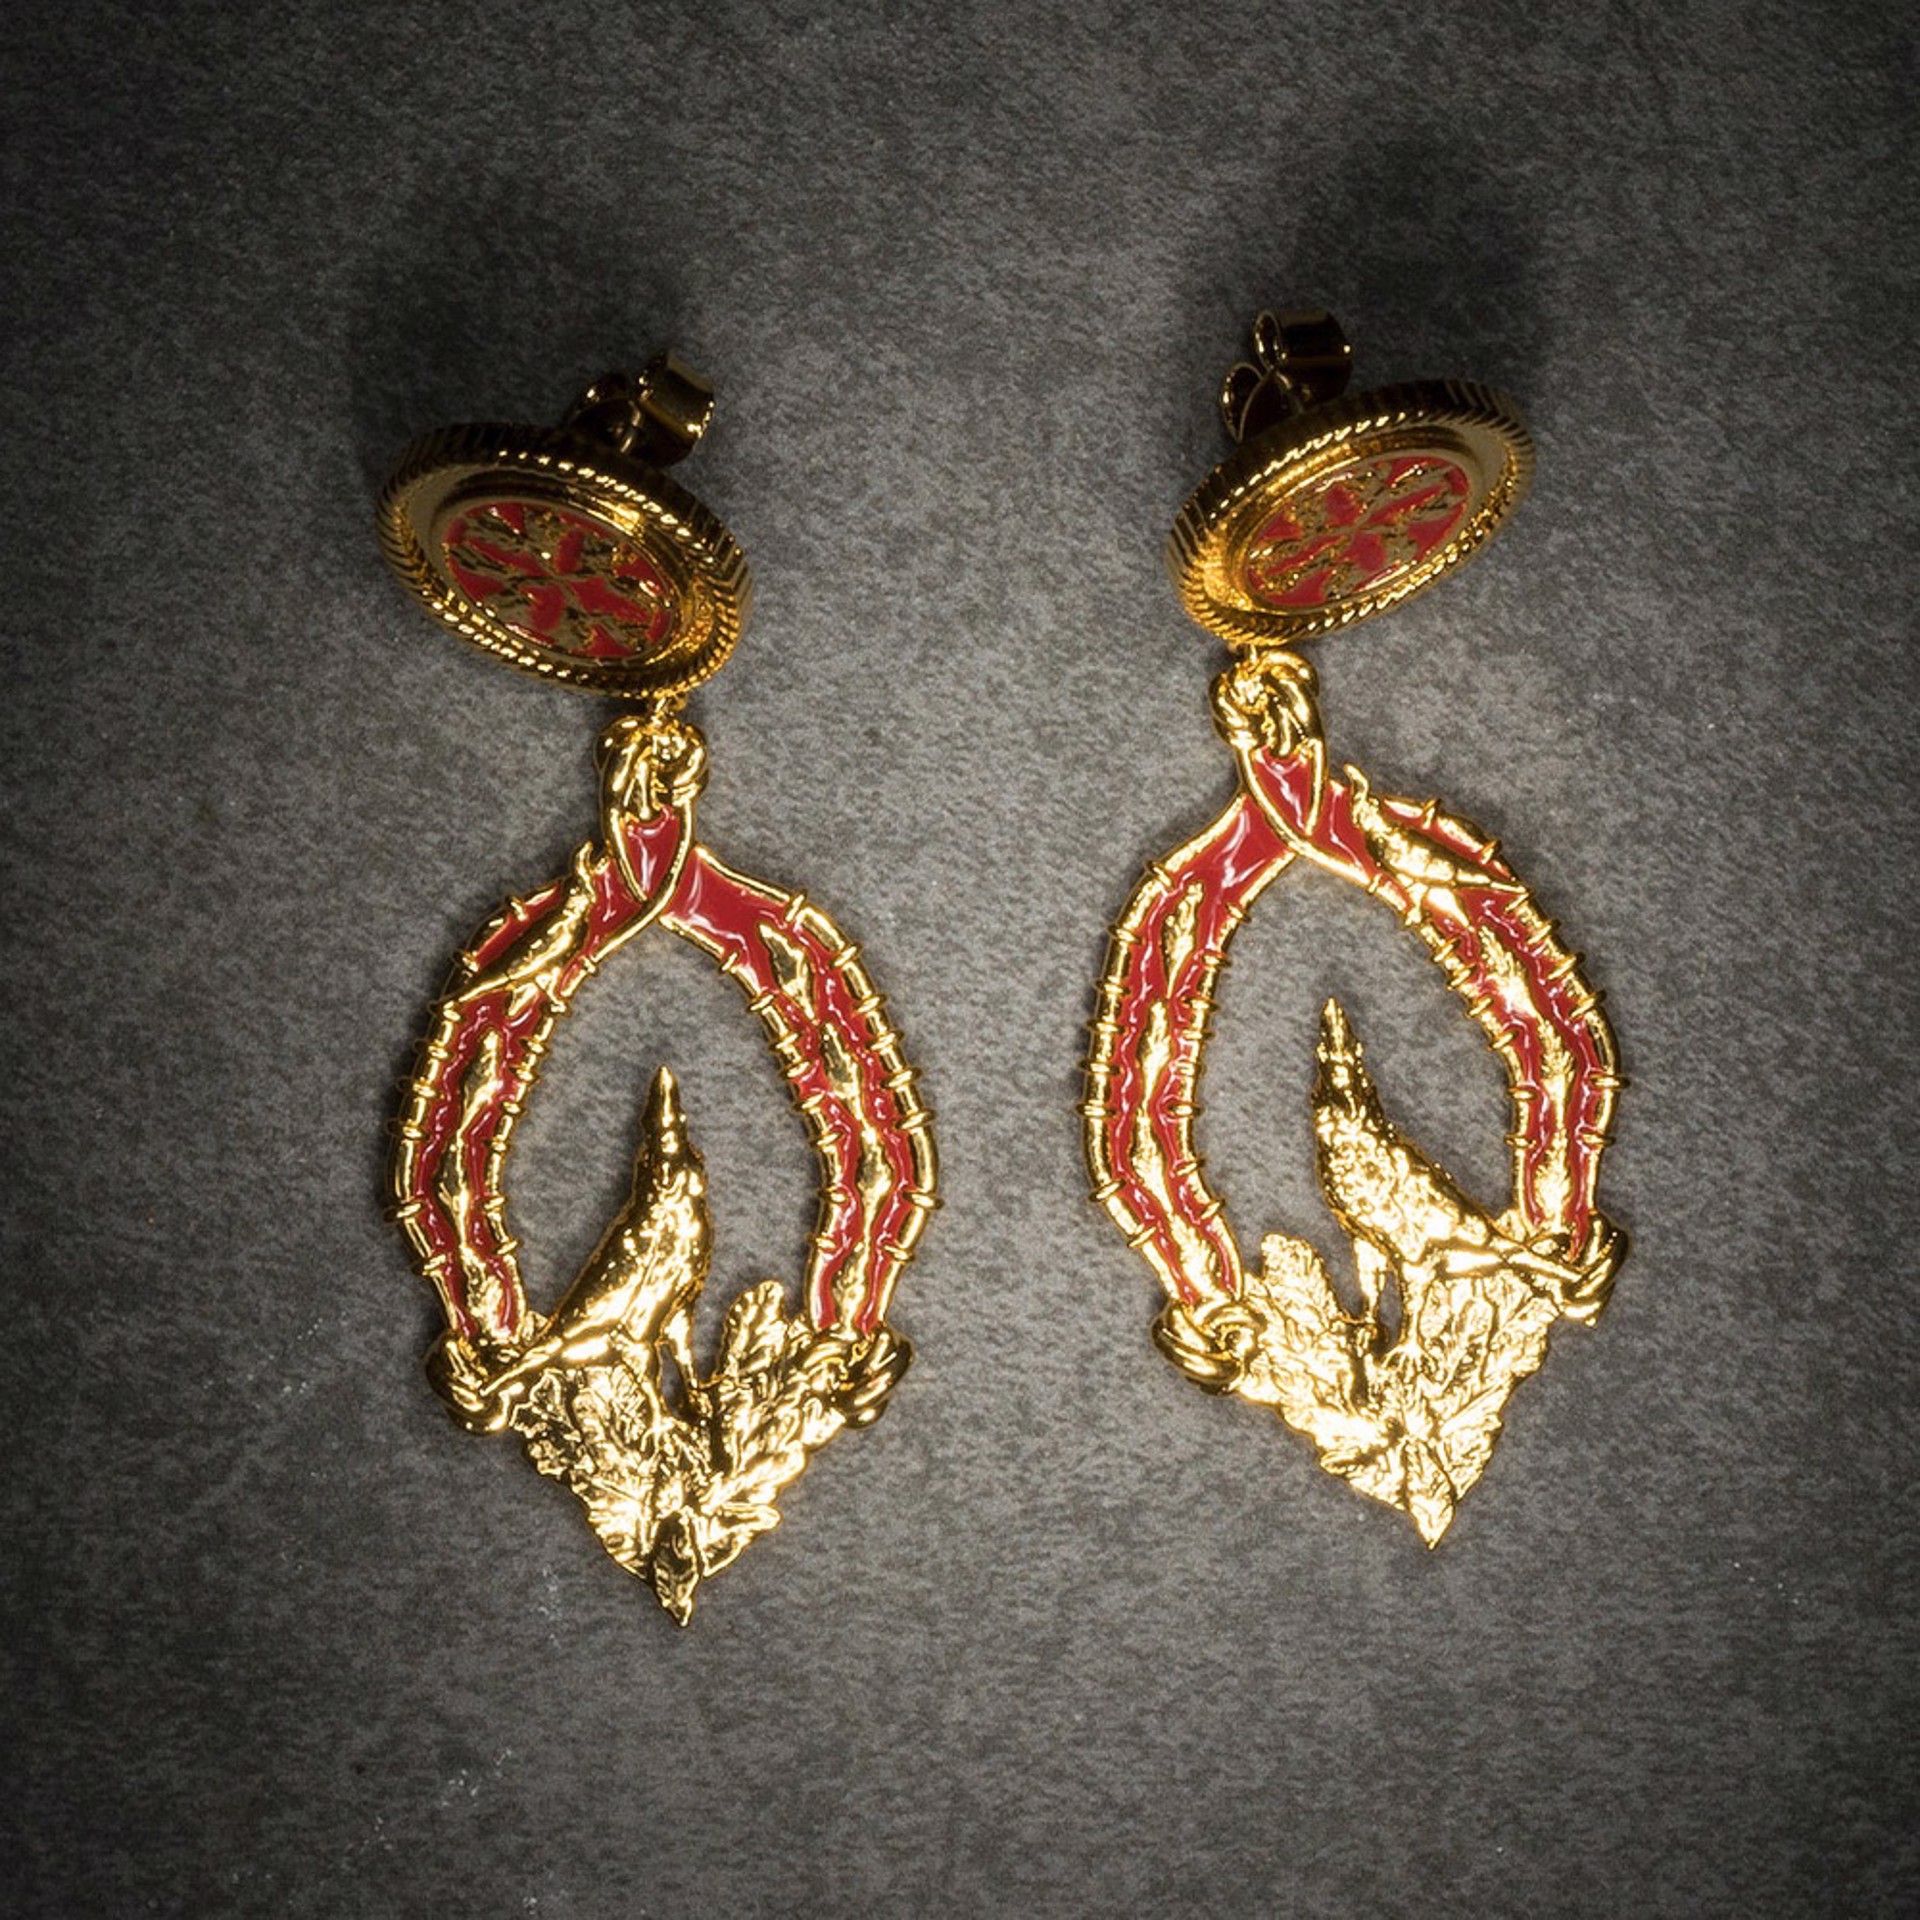 Vigor Earrings Classic - Gold and Red by Angela Mia